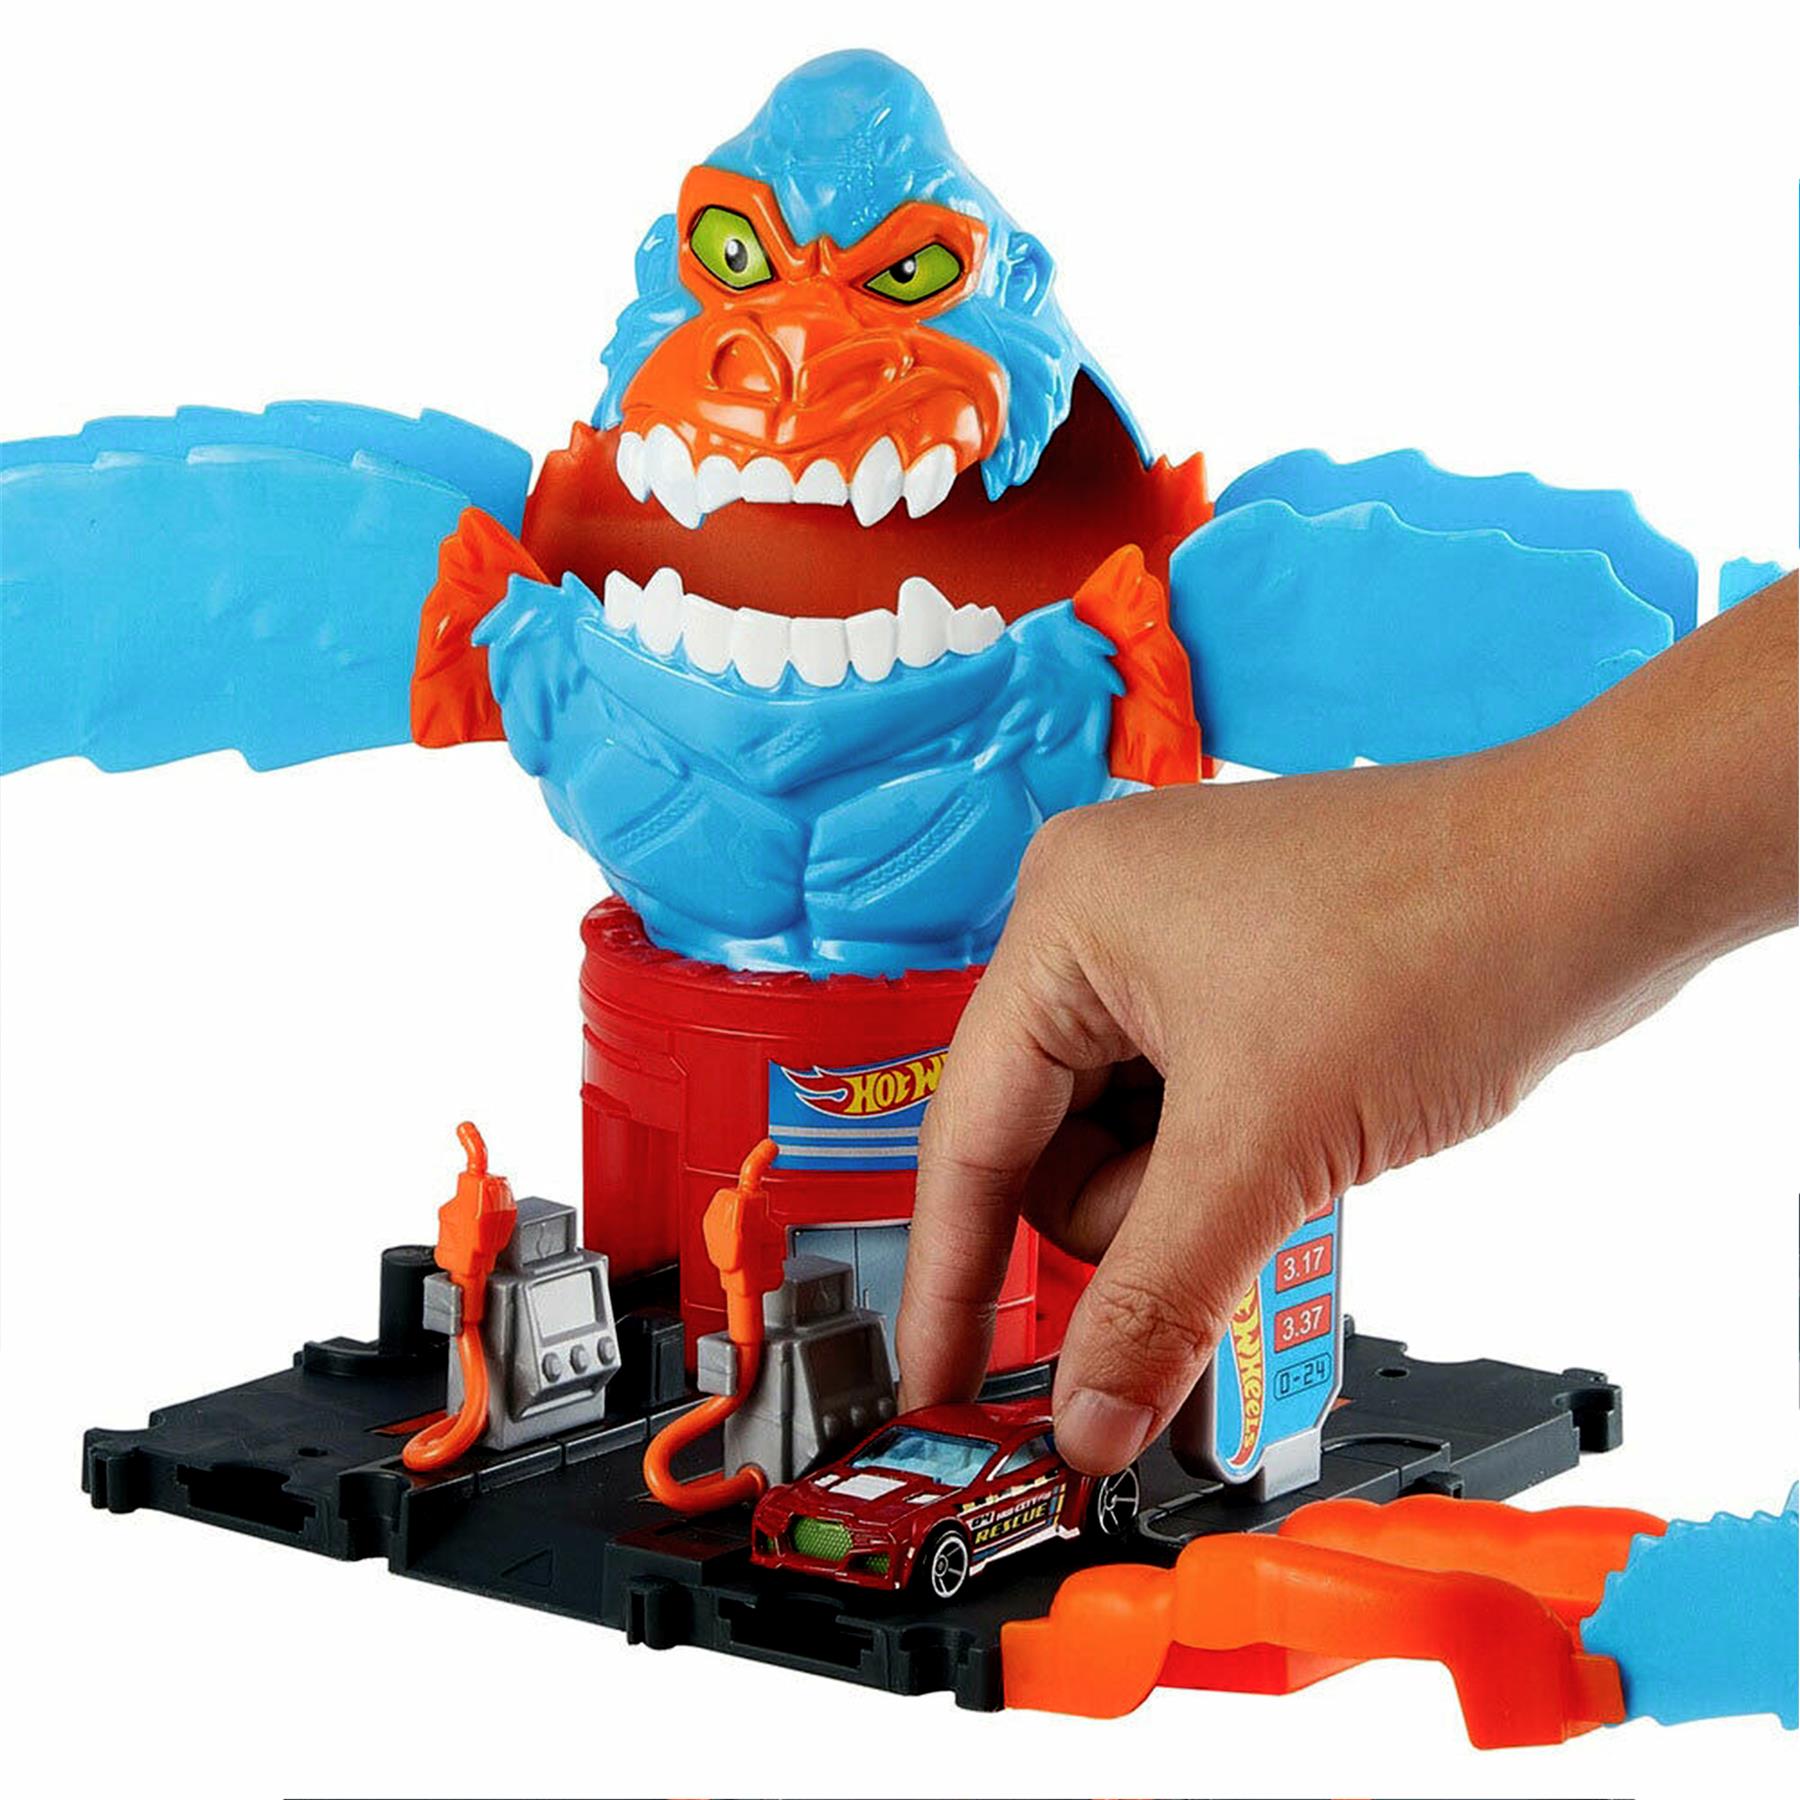 Hot Wheels City Wreck & Ride Gorilla Attack Playset by Hot Wheels - The Magic Toy Shop